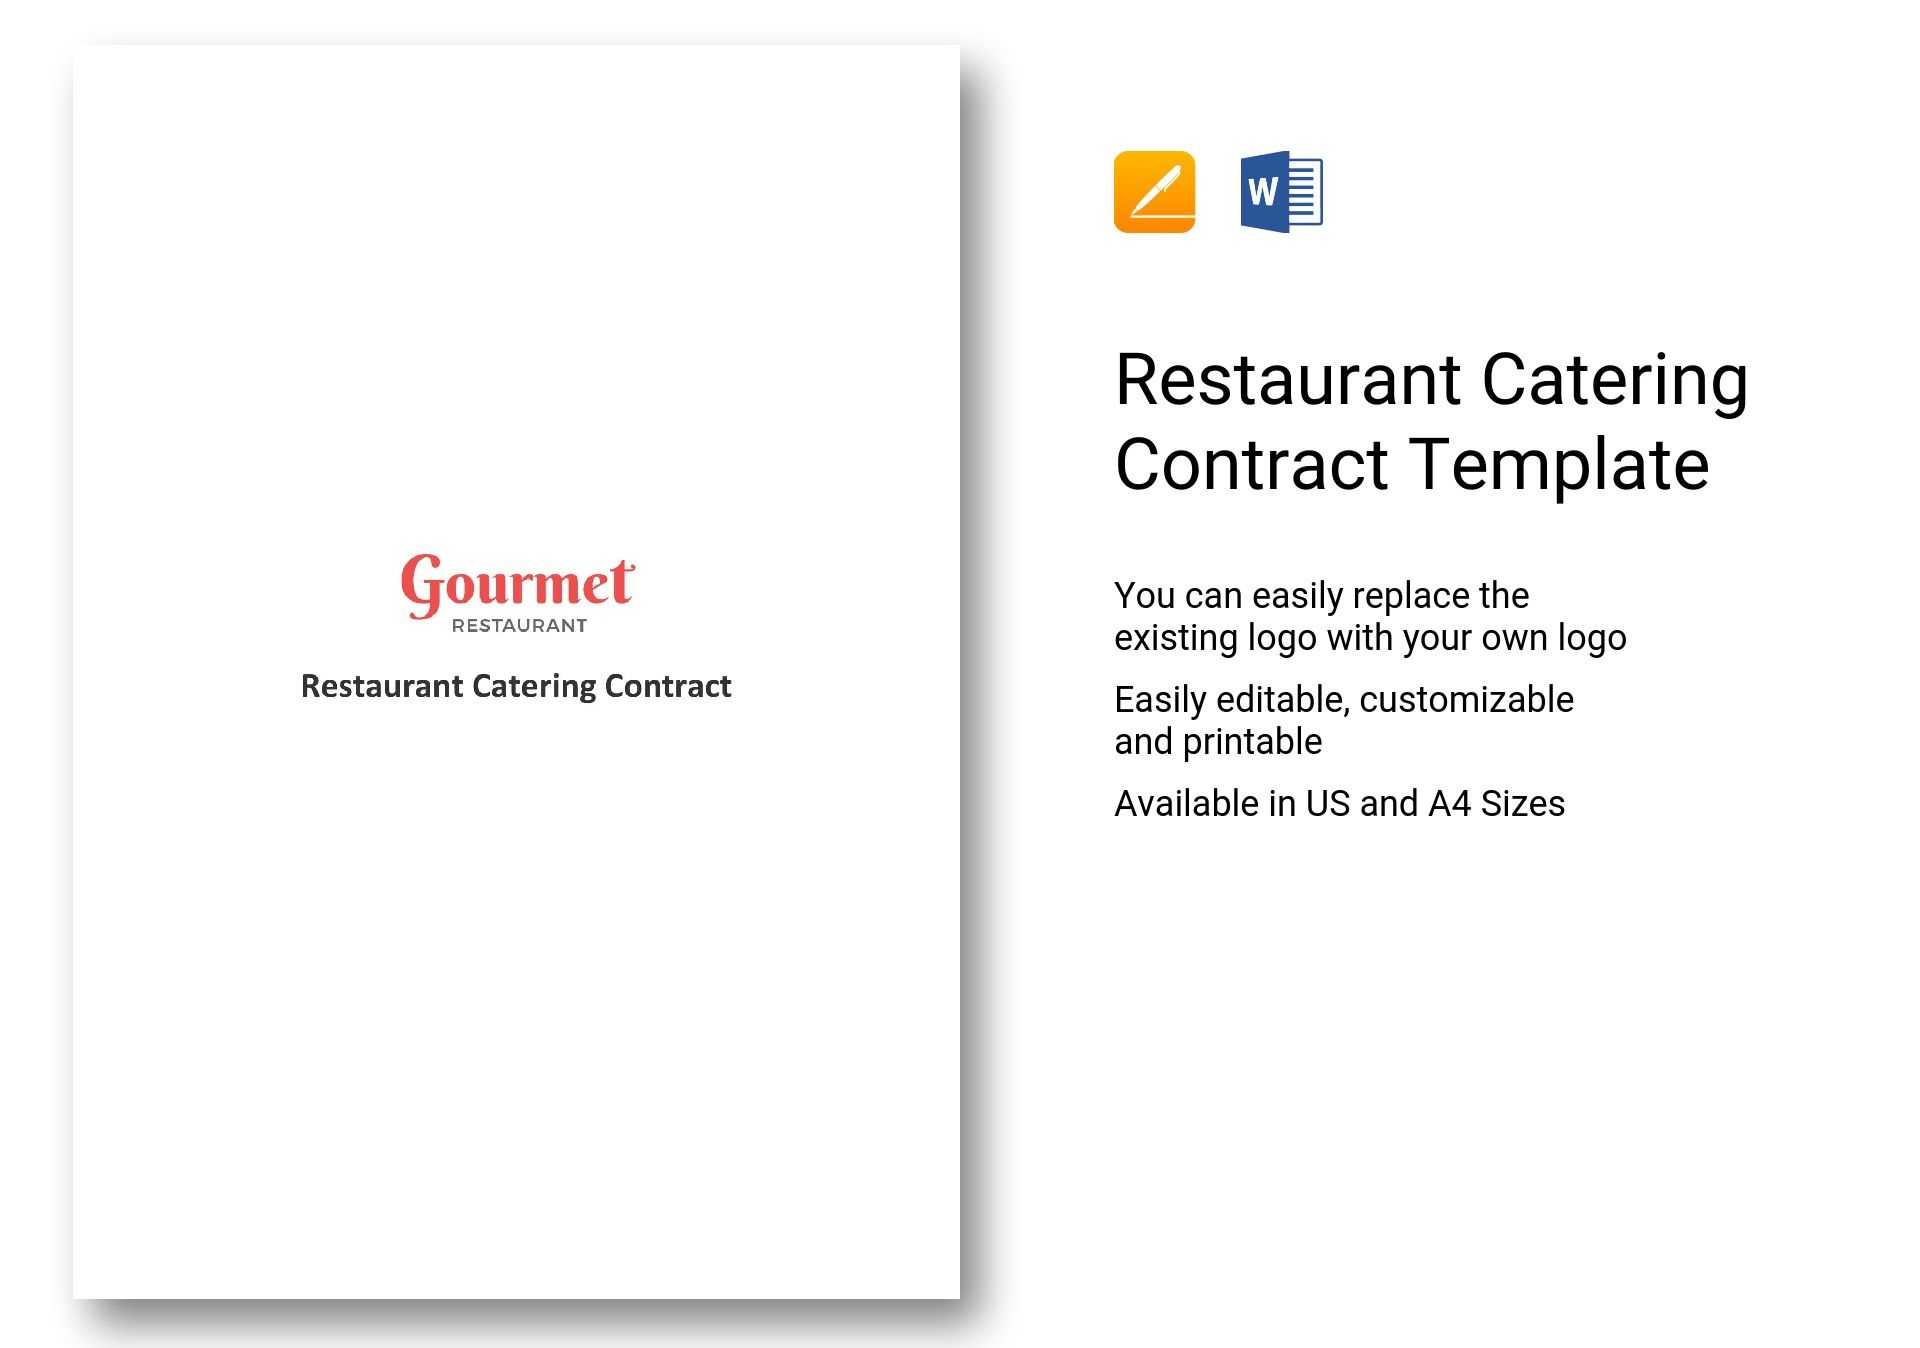 Restaurant Catering Contract Template In Word, Apple Pages With Regard To Catering Contract Template Word